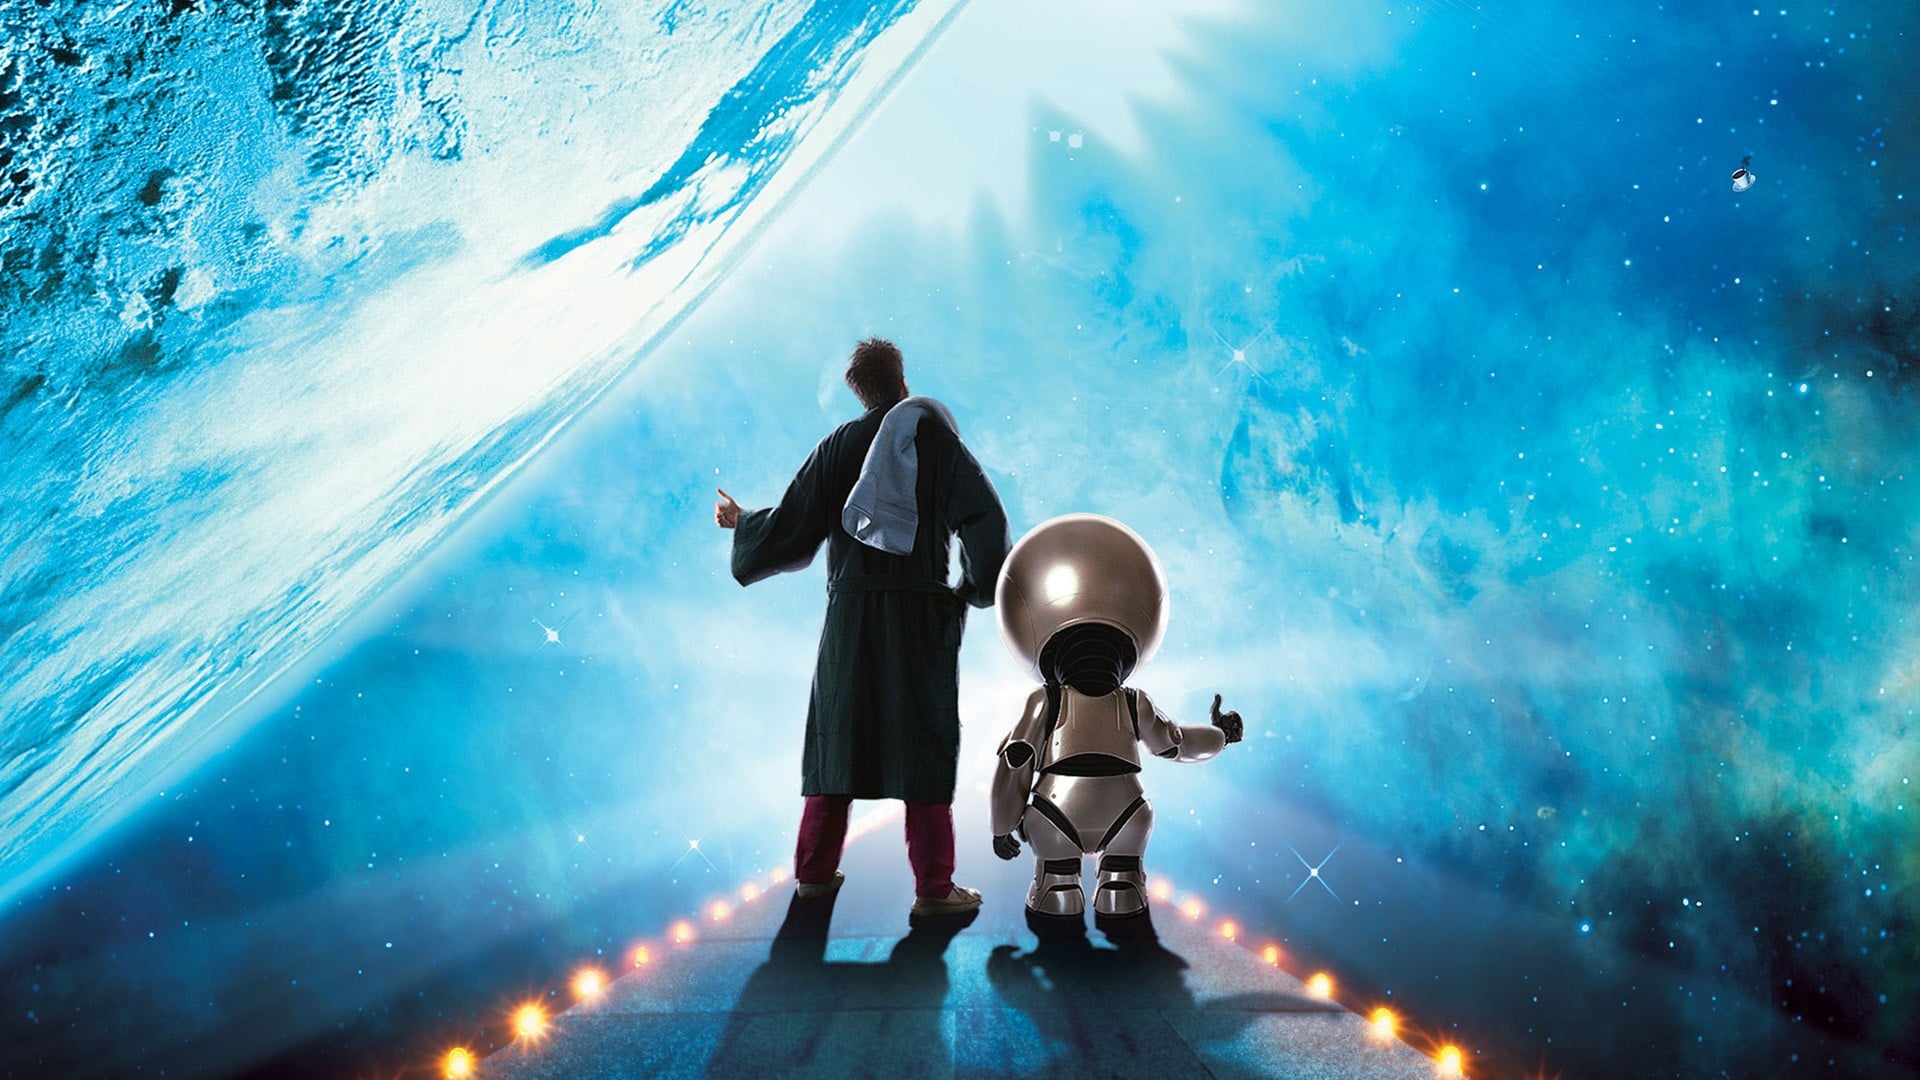 The Hitchhiker’s Guide to the Galaxy 2005 123movies